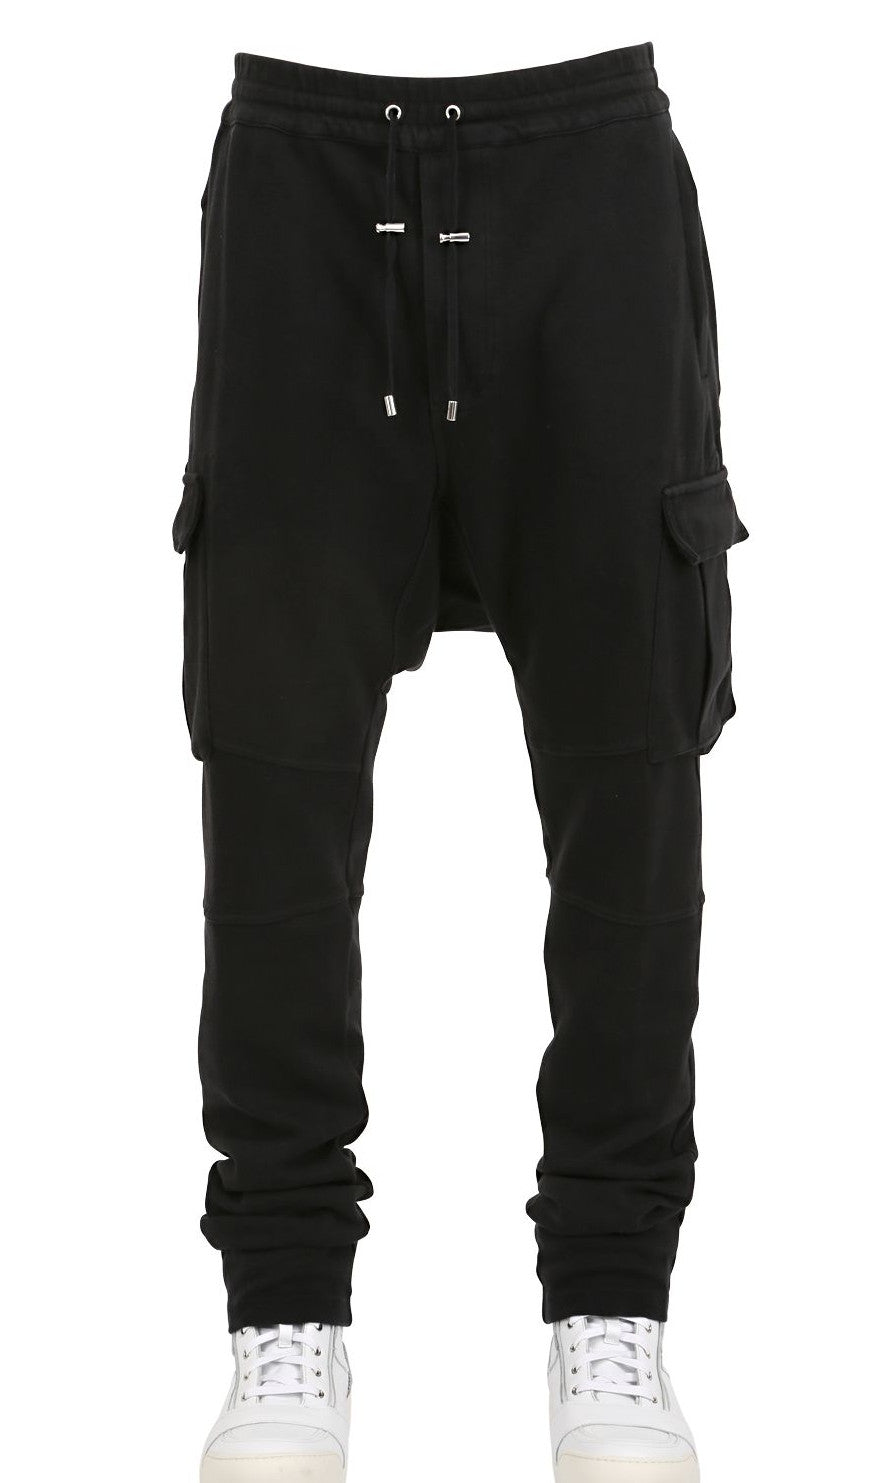 John Doe Stroker Cargo XTM | Motorcycle pants with Kevlar | Motorcycle  Cargo pants : Amazon.in: Clothing & Accessories